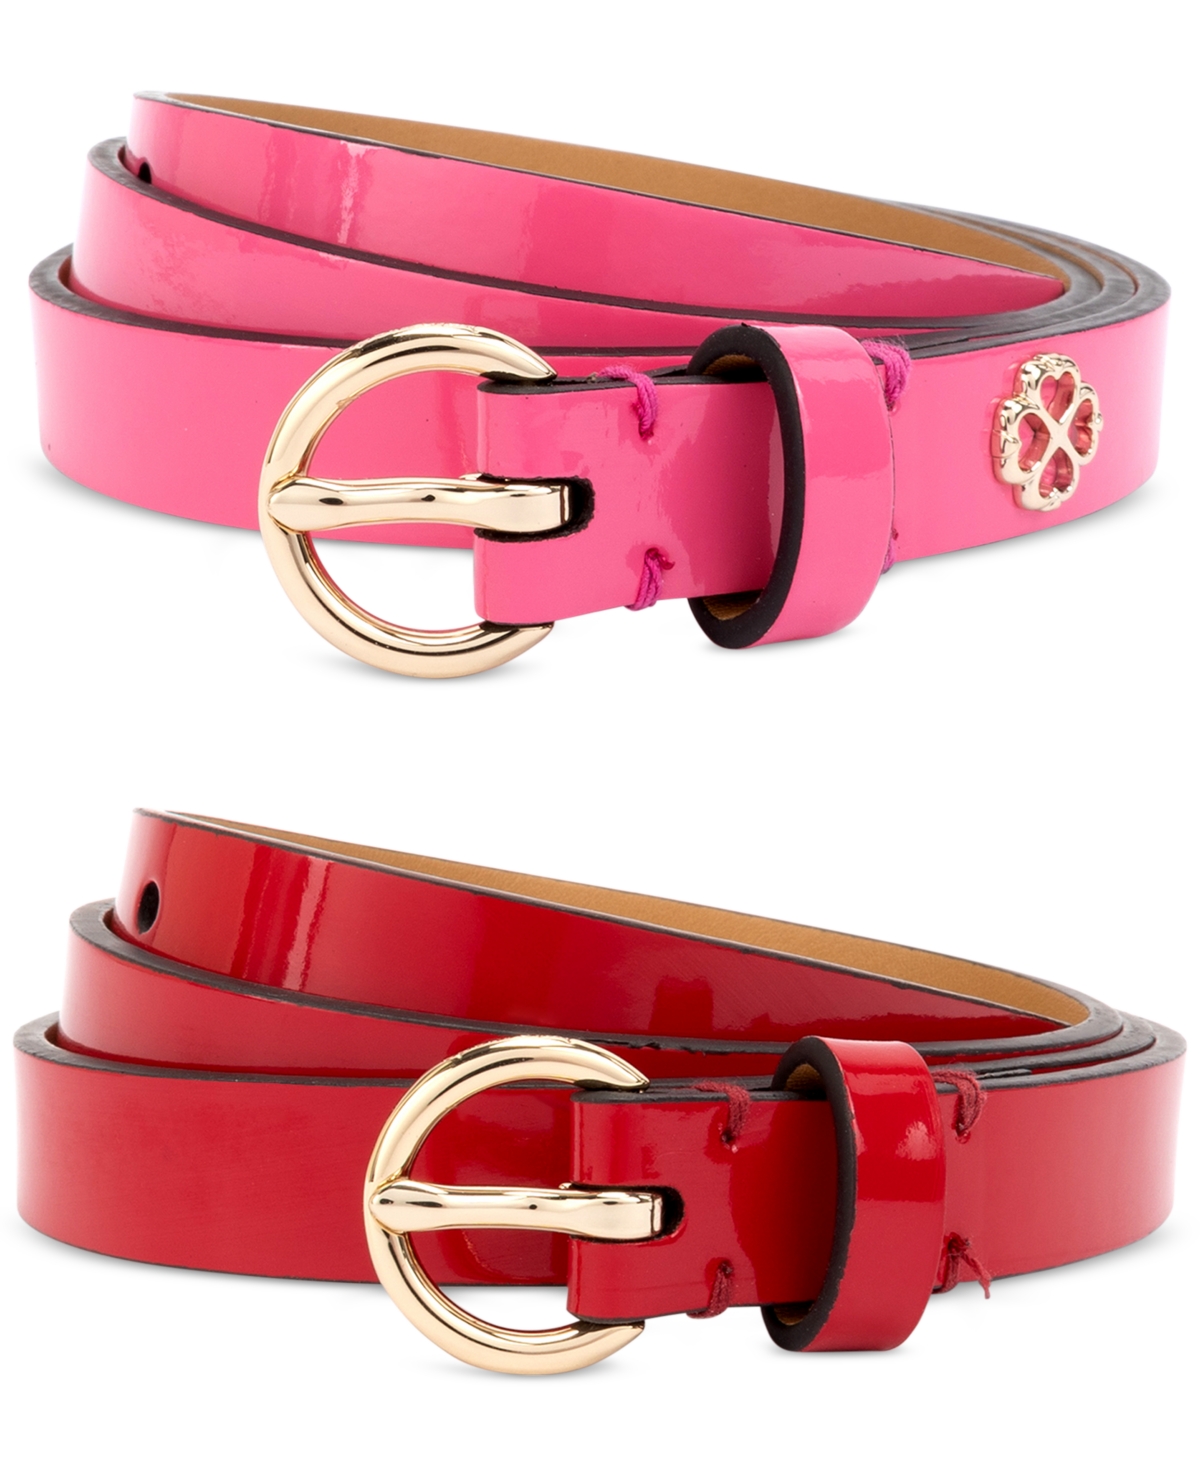 Women's 2-Pc. Patent Leather Belts - Pom Pom Pink/engine Red